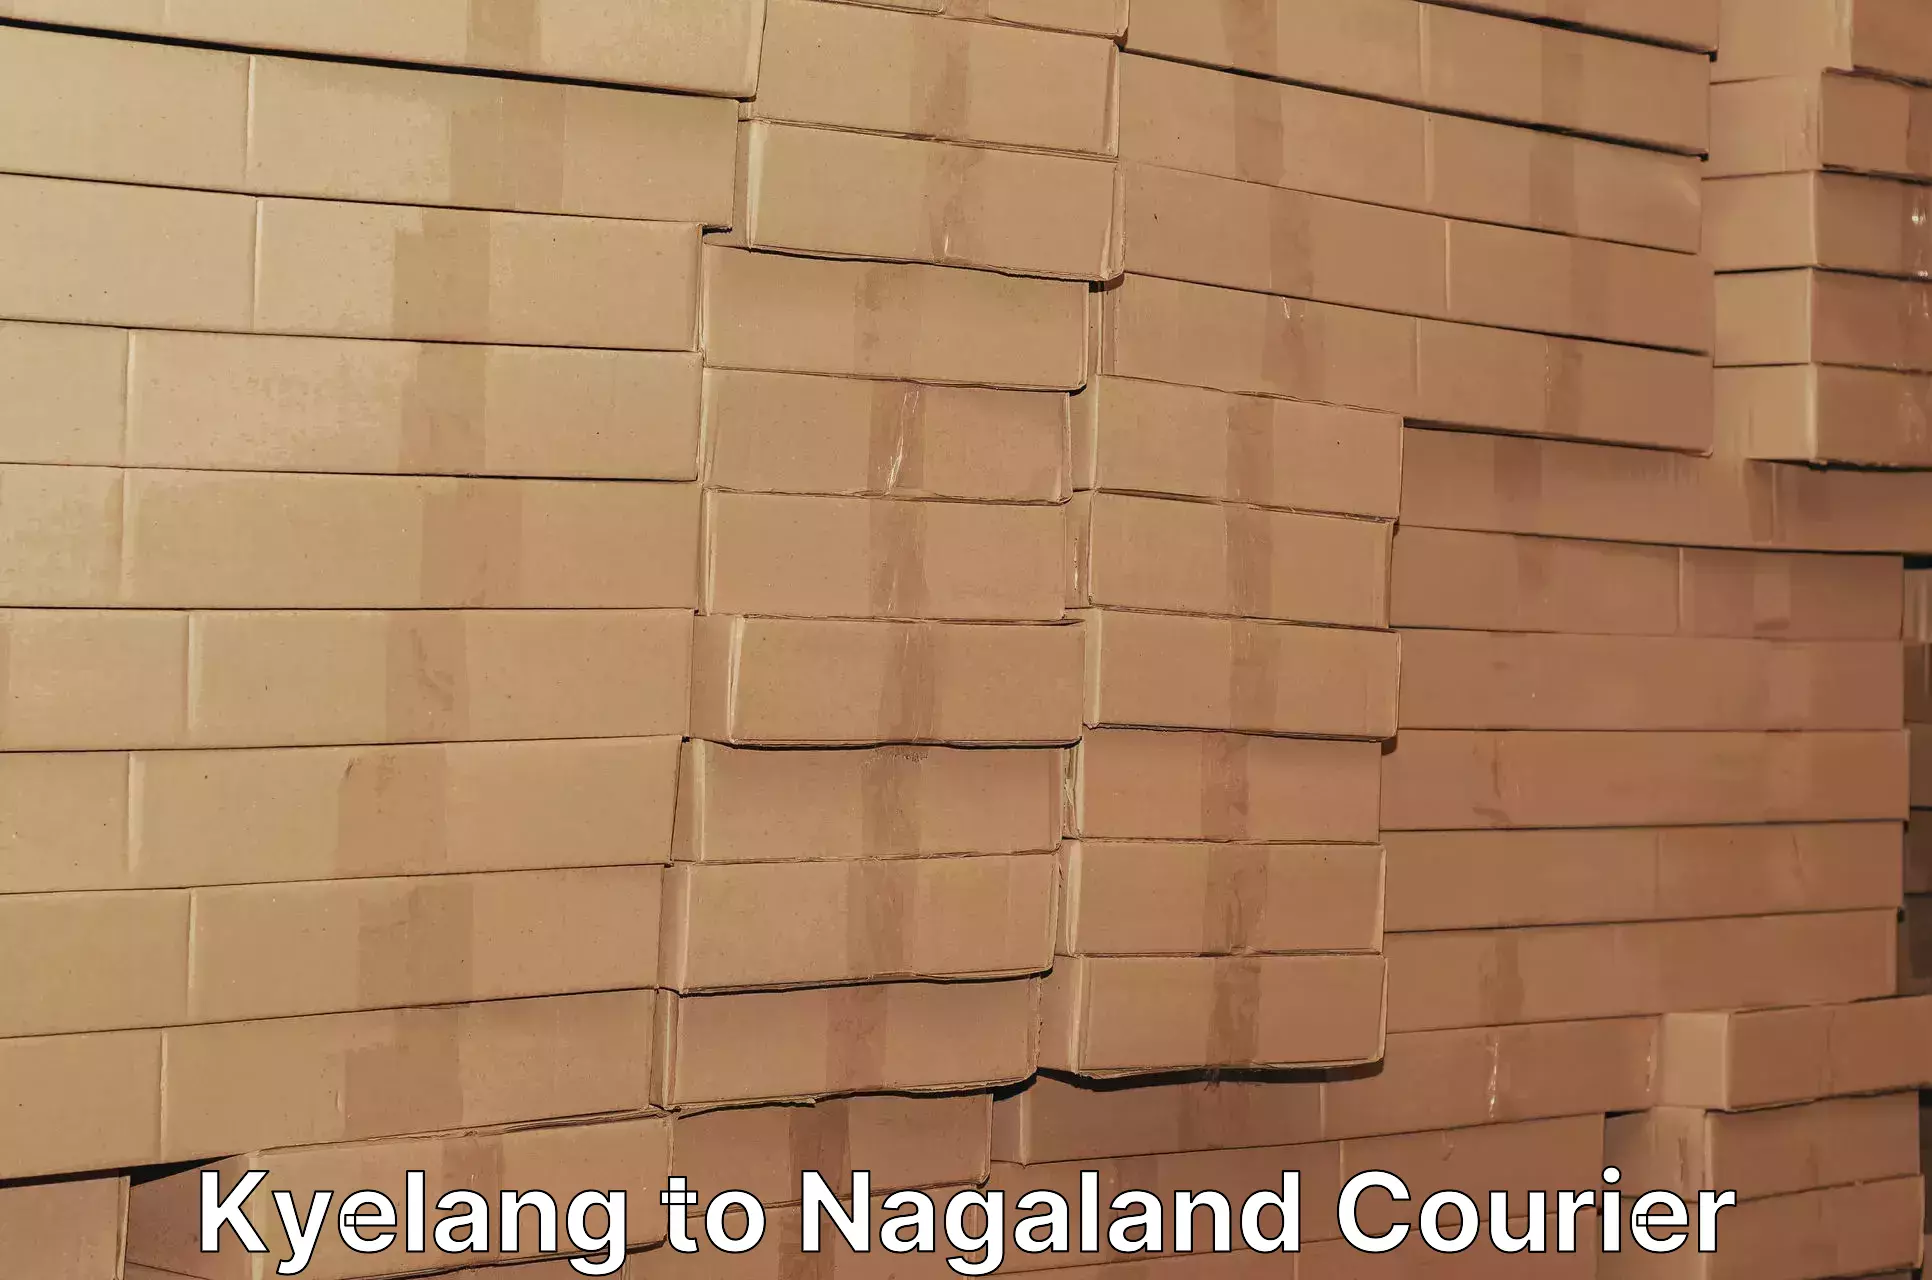 Ocean freight courier in Kyelang to Nagaland